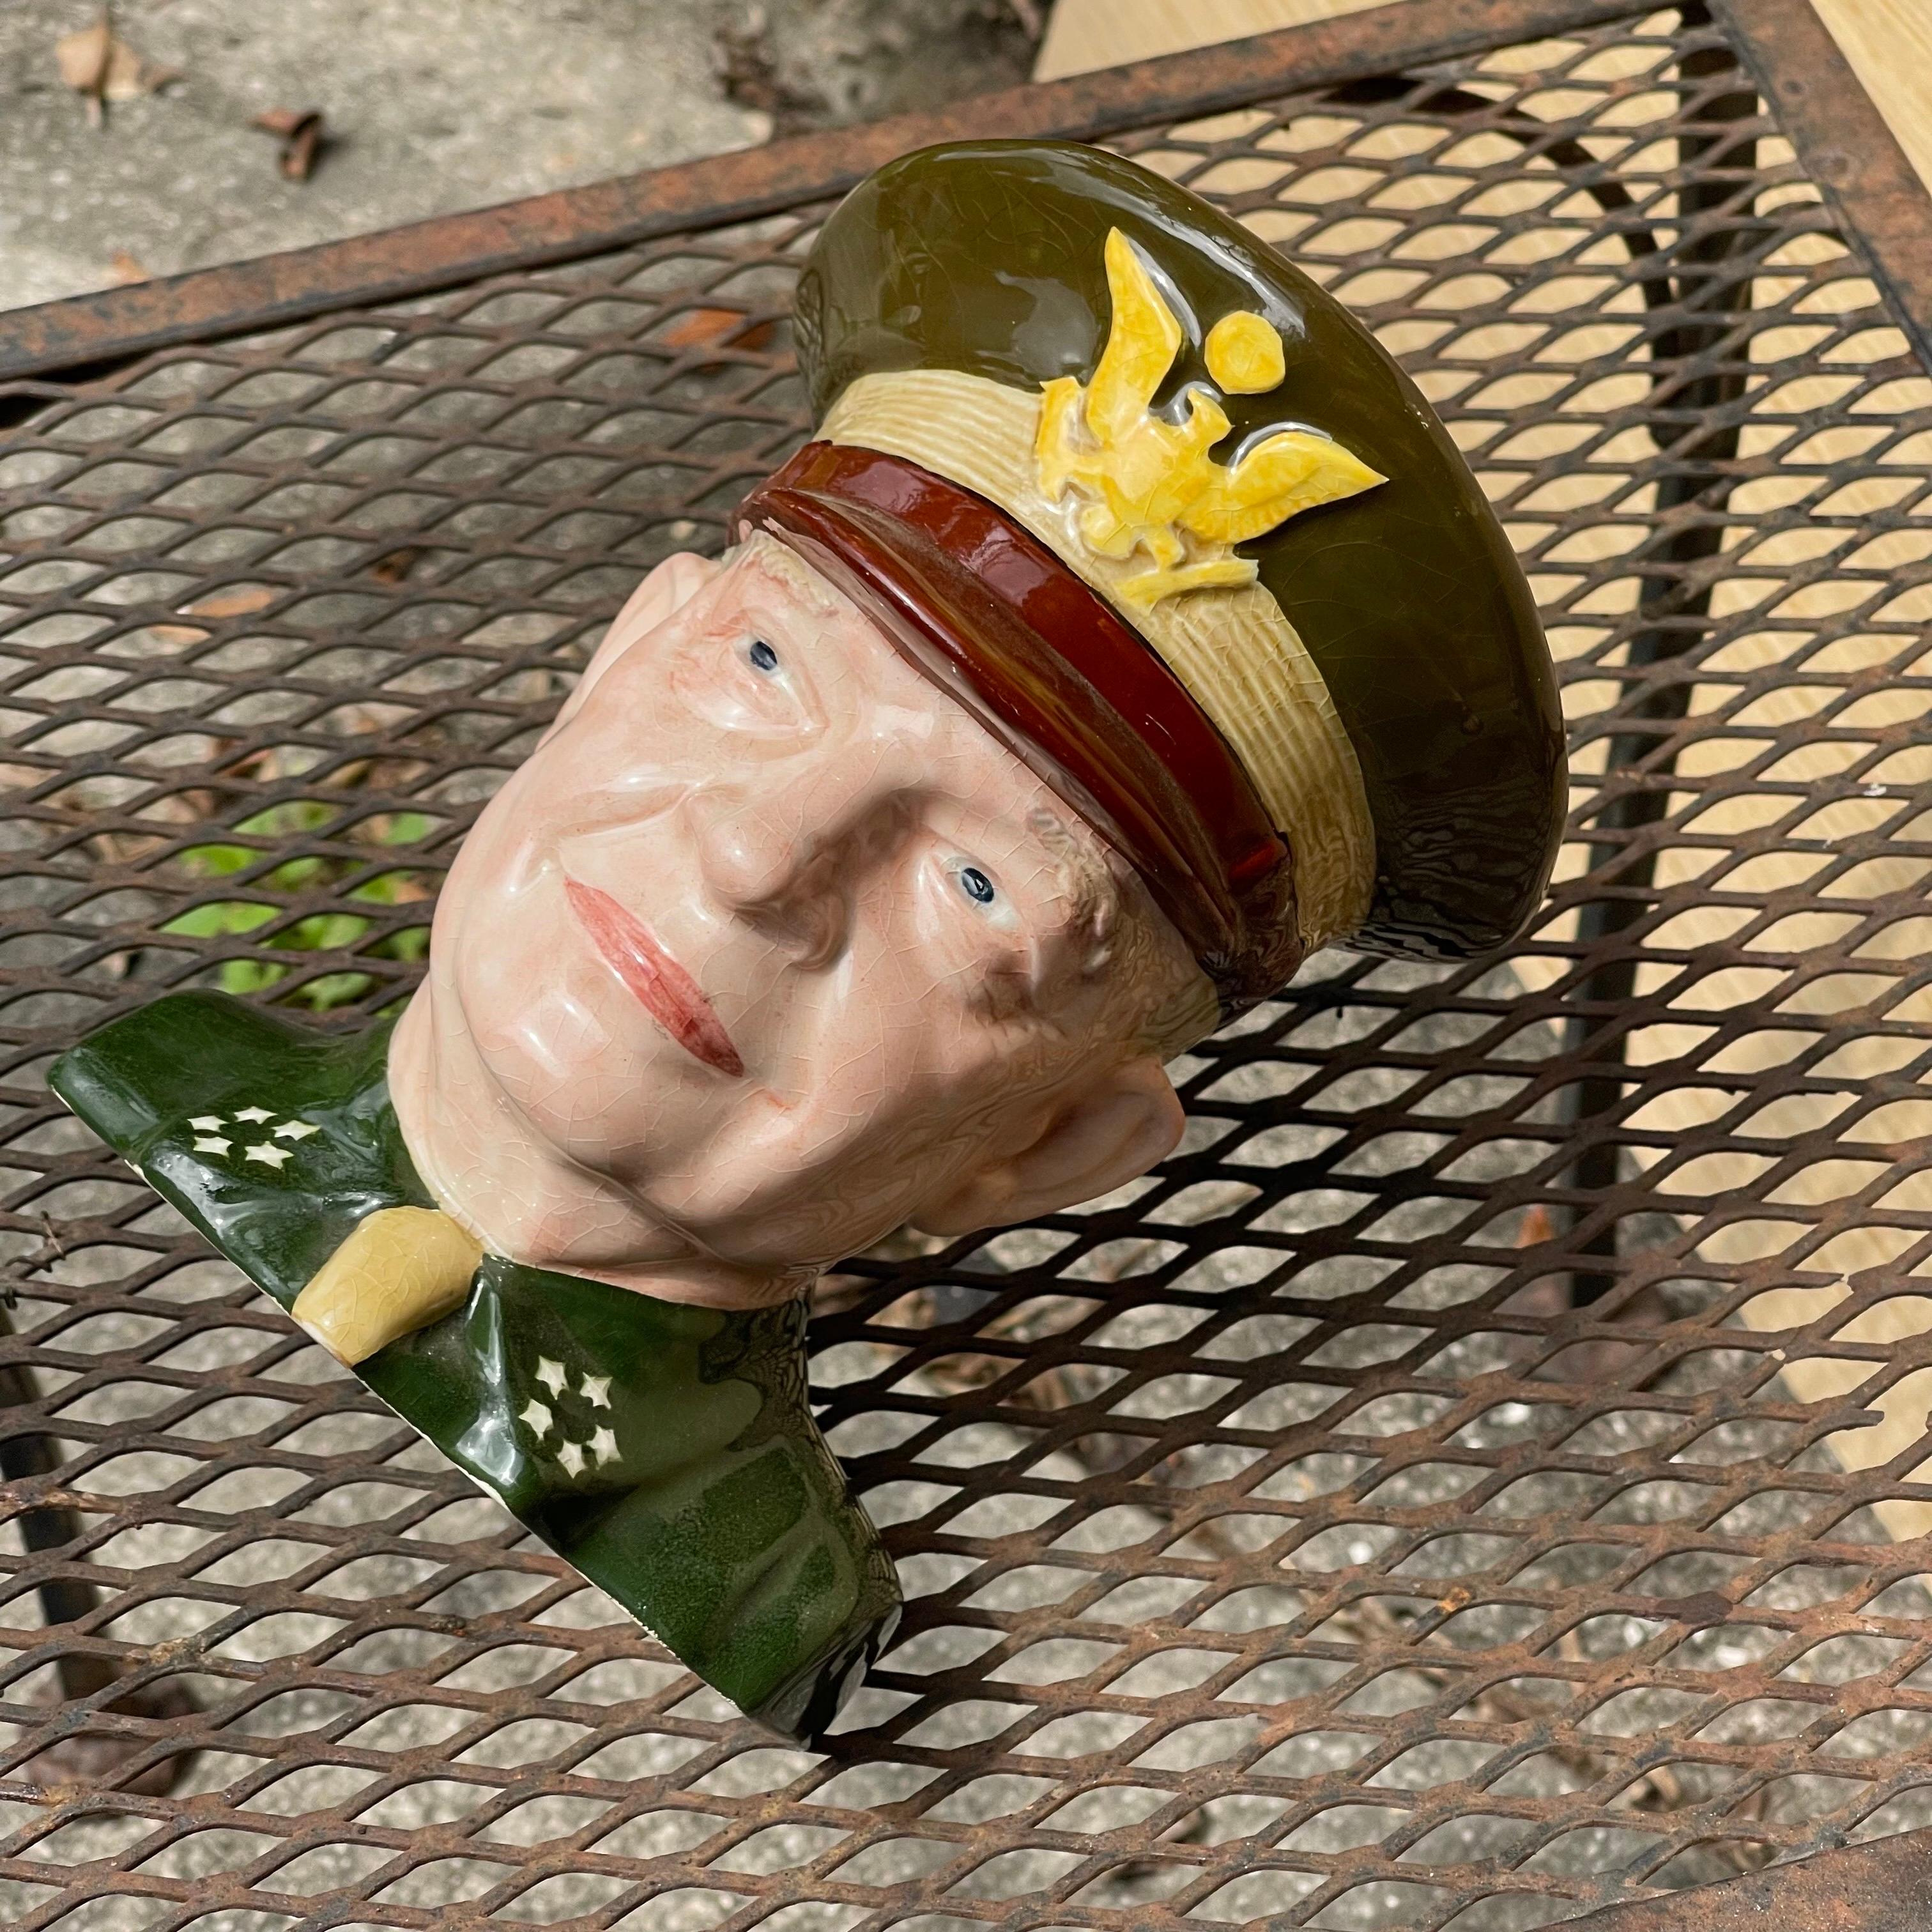 Longtime Conan O’Brien fans will recognize this as the same form mug that sat on his late night desk for many years. Aside from that, this is an excellent rendering of the Iconic General and President. 